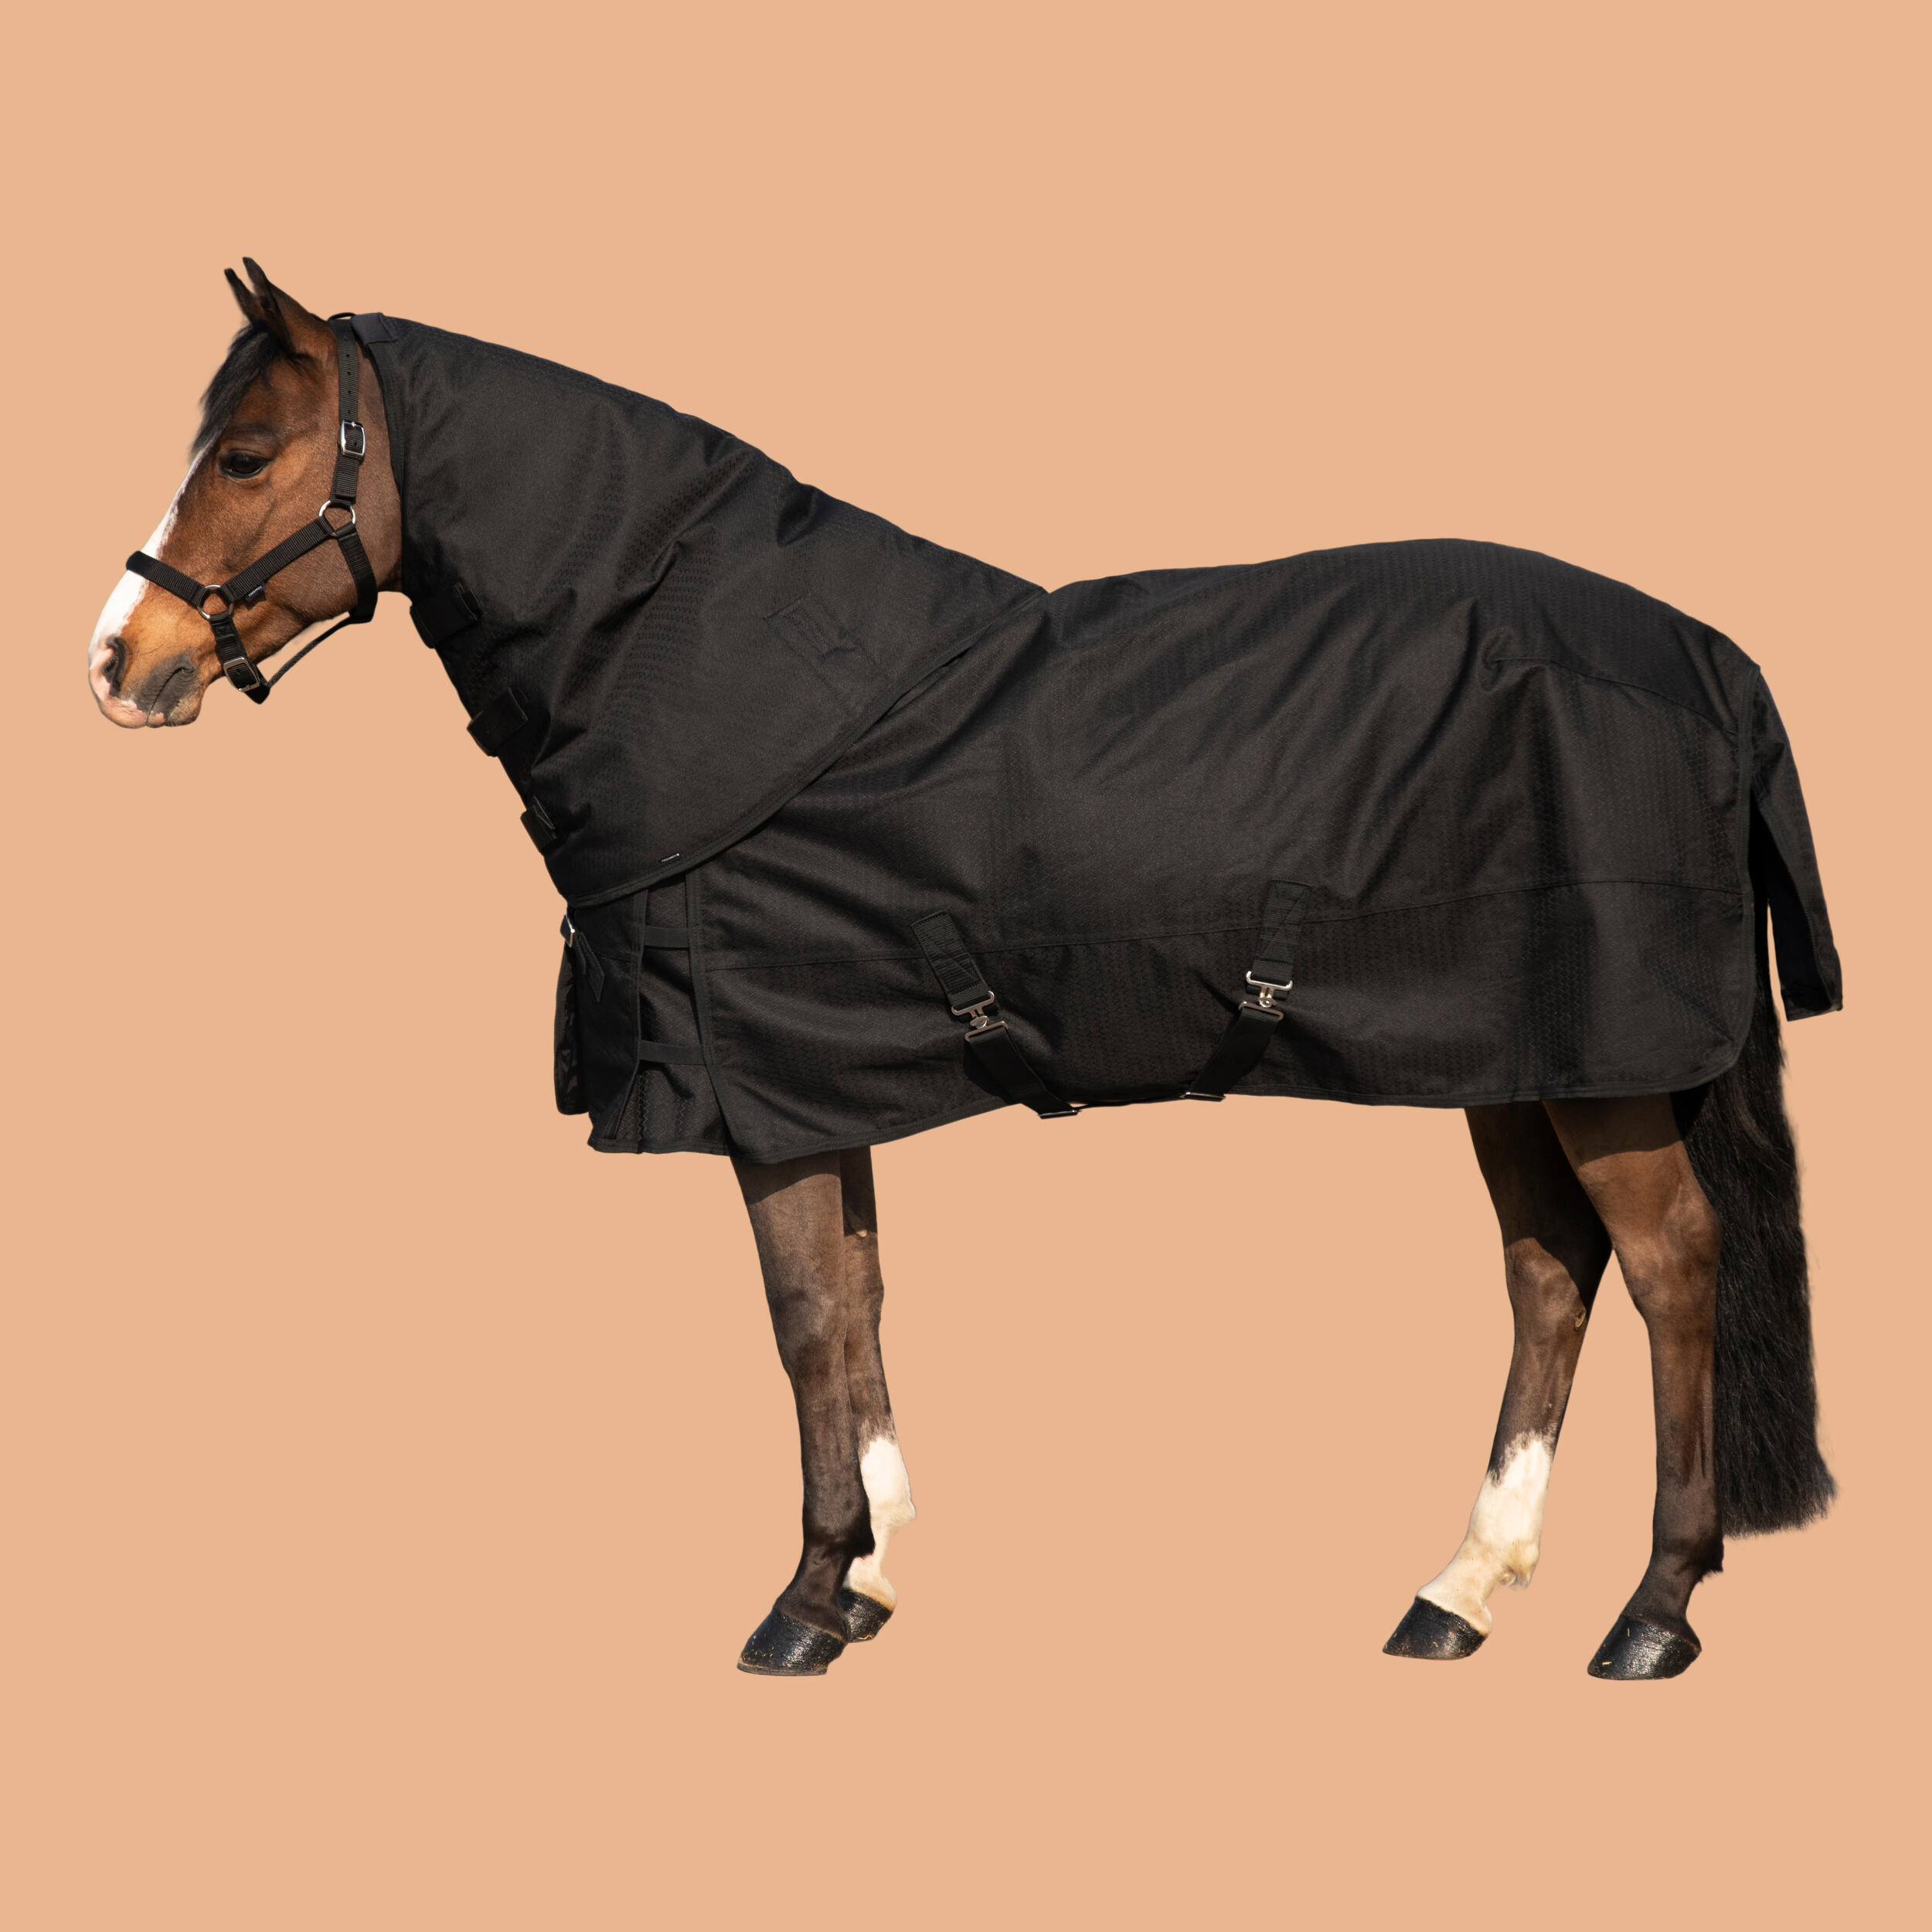 Horse Riding Waterproof Neck Cover for Horse Allweather 200 - Black 7/7